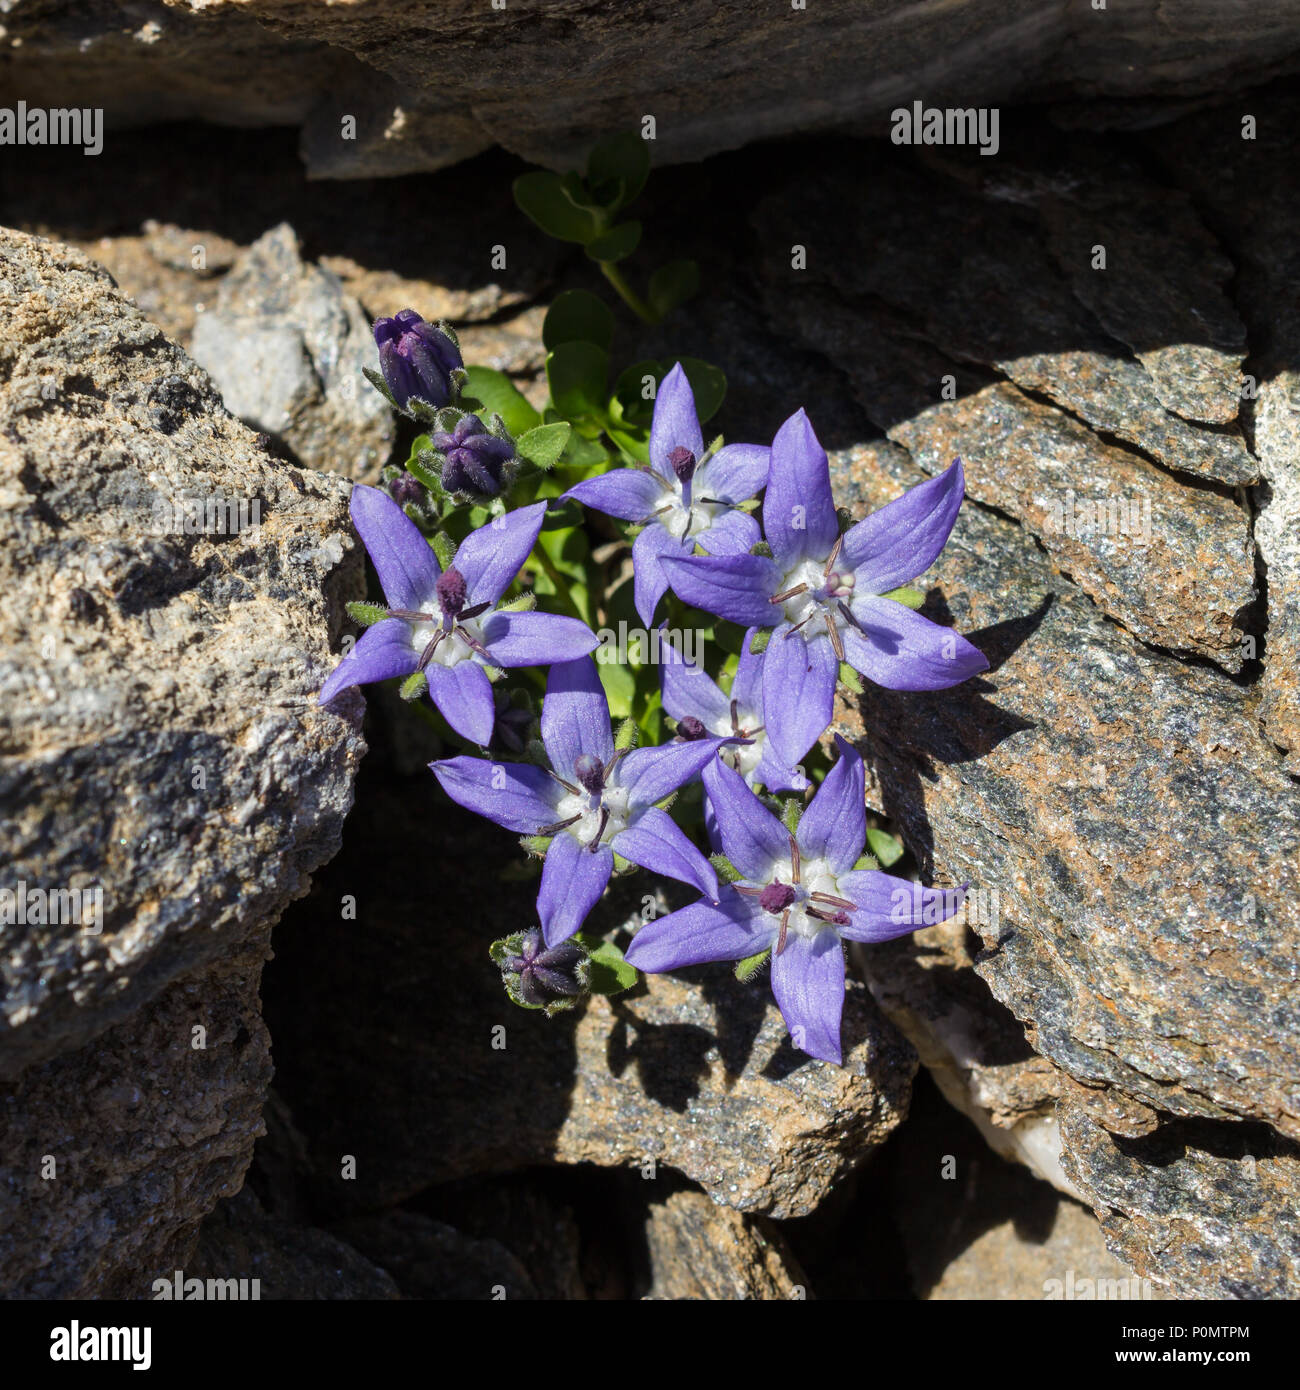 Alpine flower campanula cenisia (Mont Cenis Bellflower),  Aosta valley Italy. Photo taken at an altitude of 2800 meters. Stock Photo